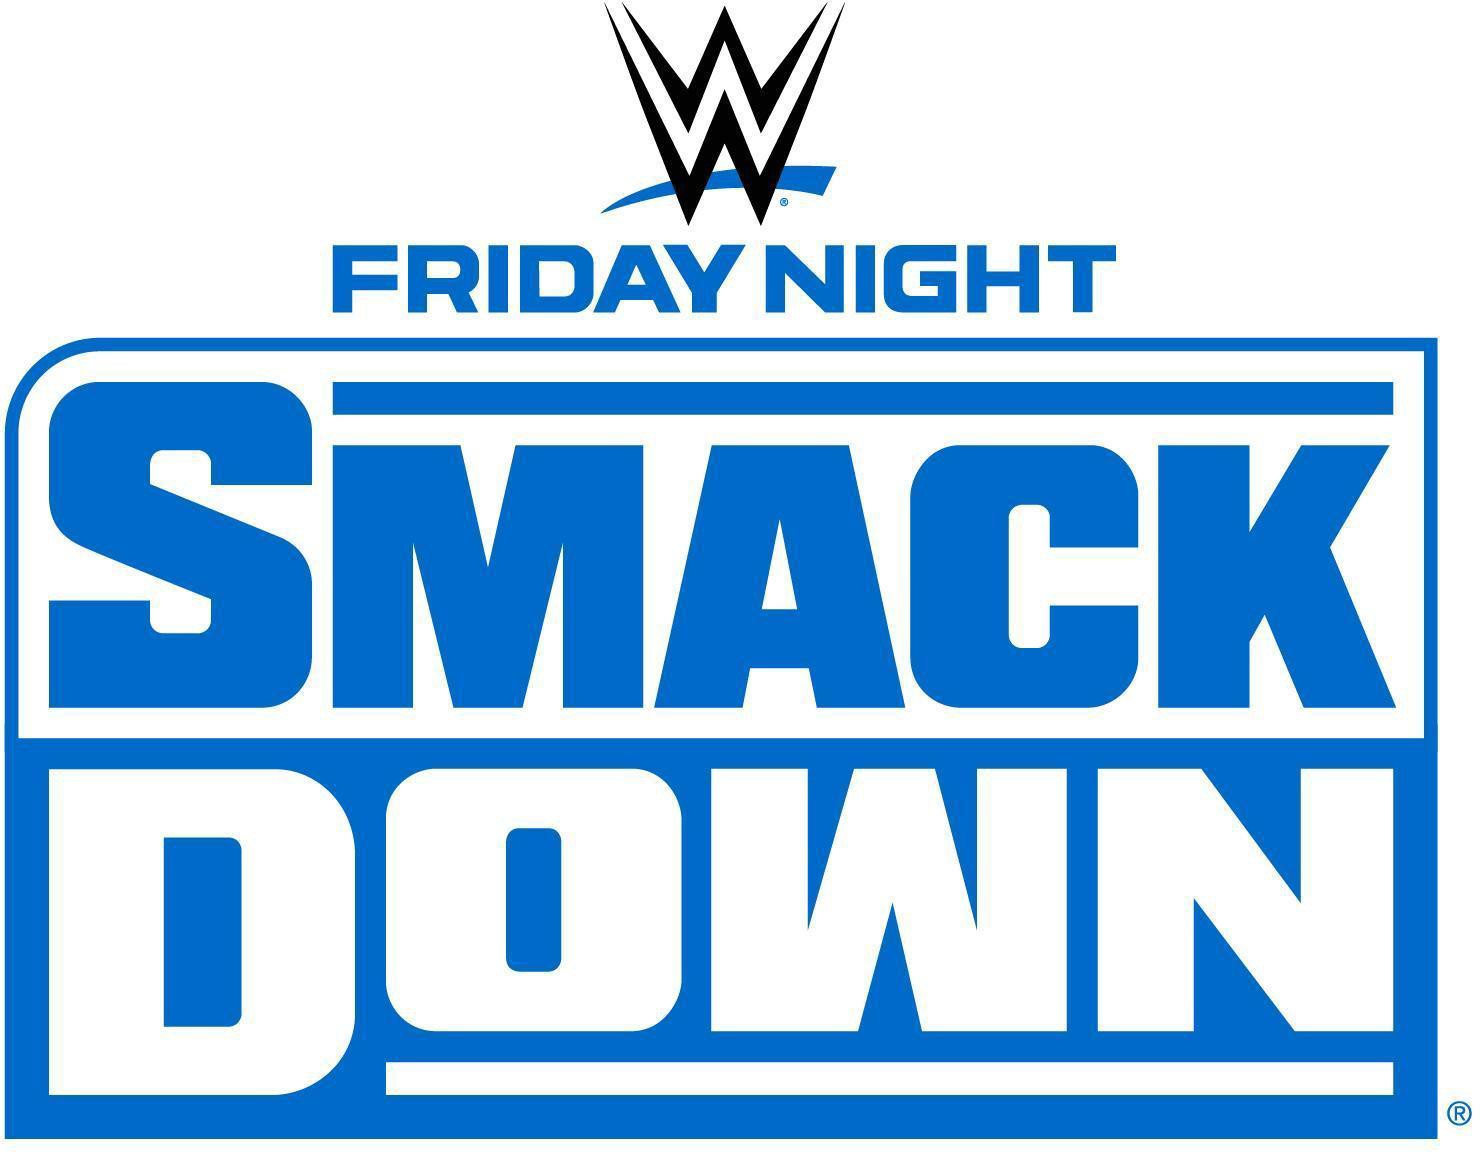 WWE `Friday Night Smackdown` logo provided by KeyBank Center Public Relations.